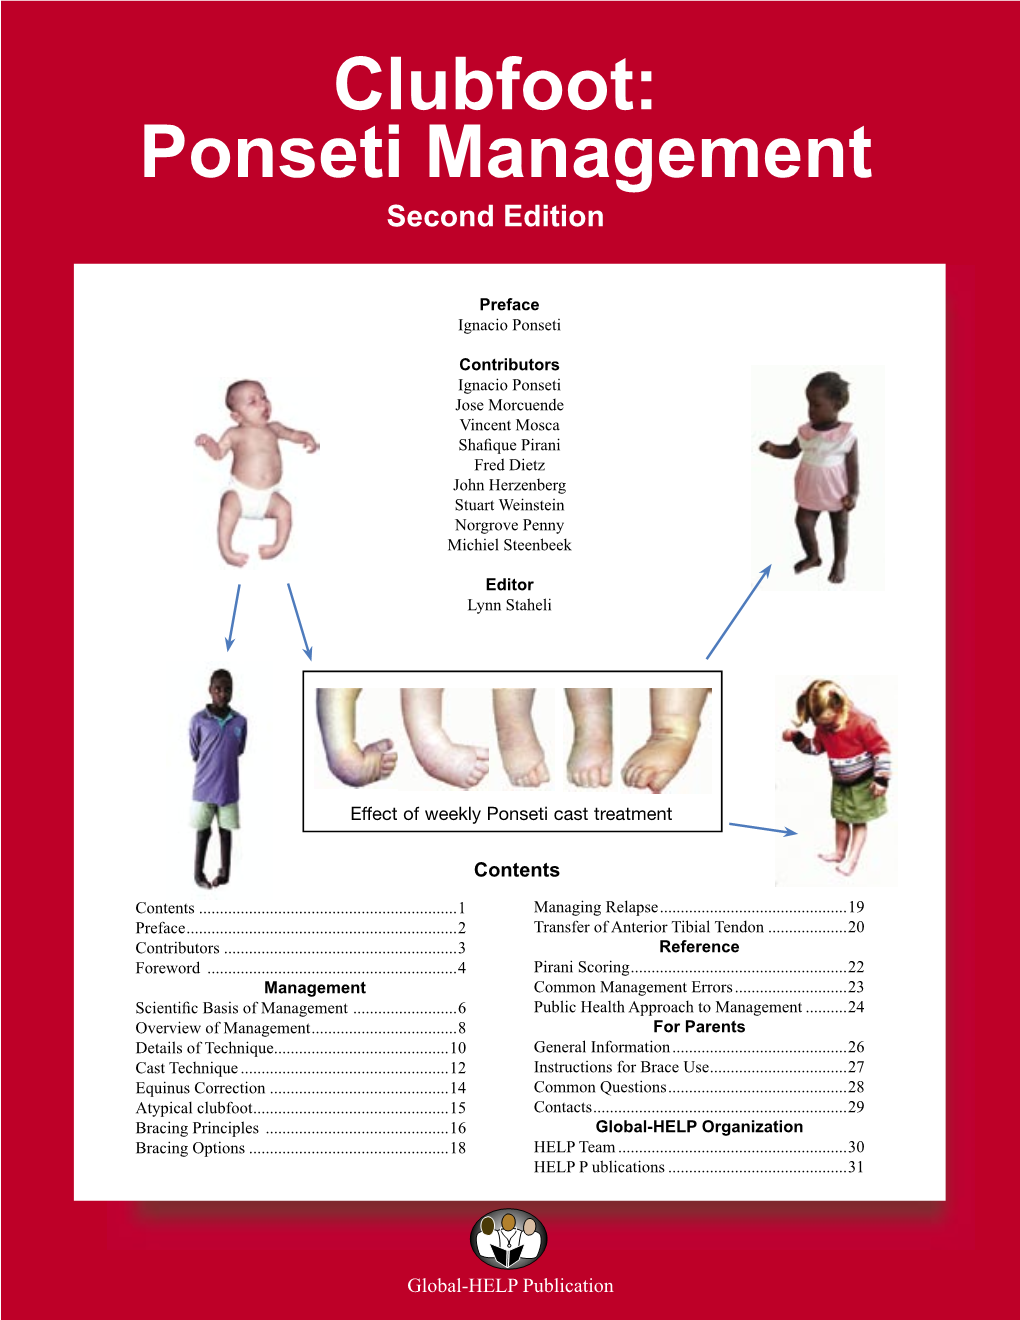 Clubfoot: Ponseti Management Second Edition